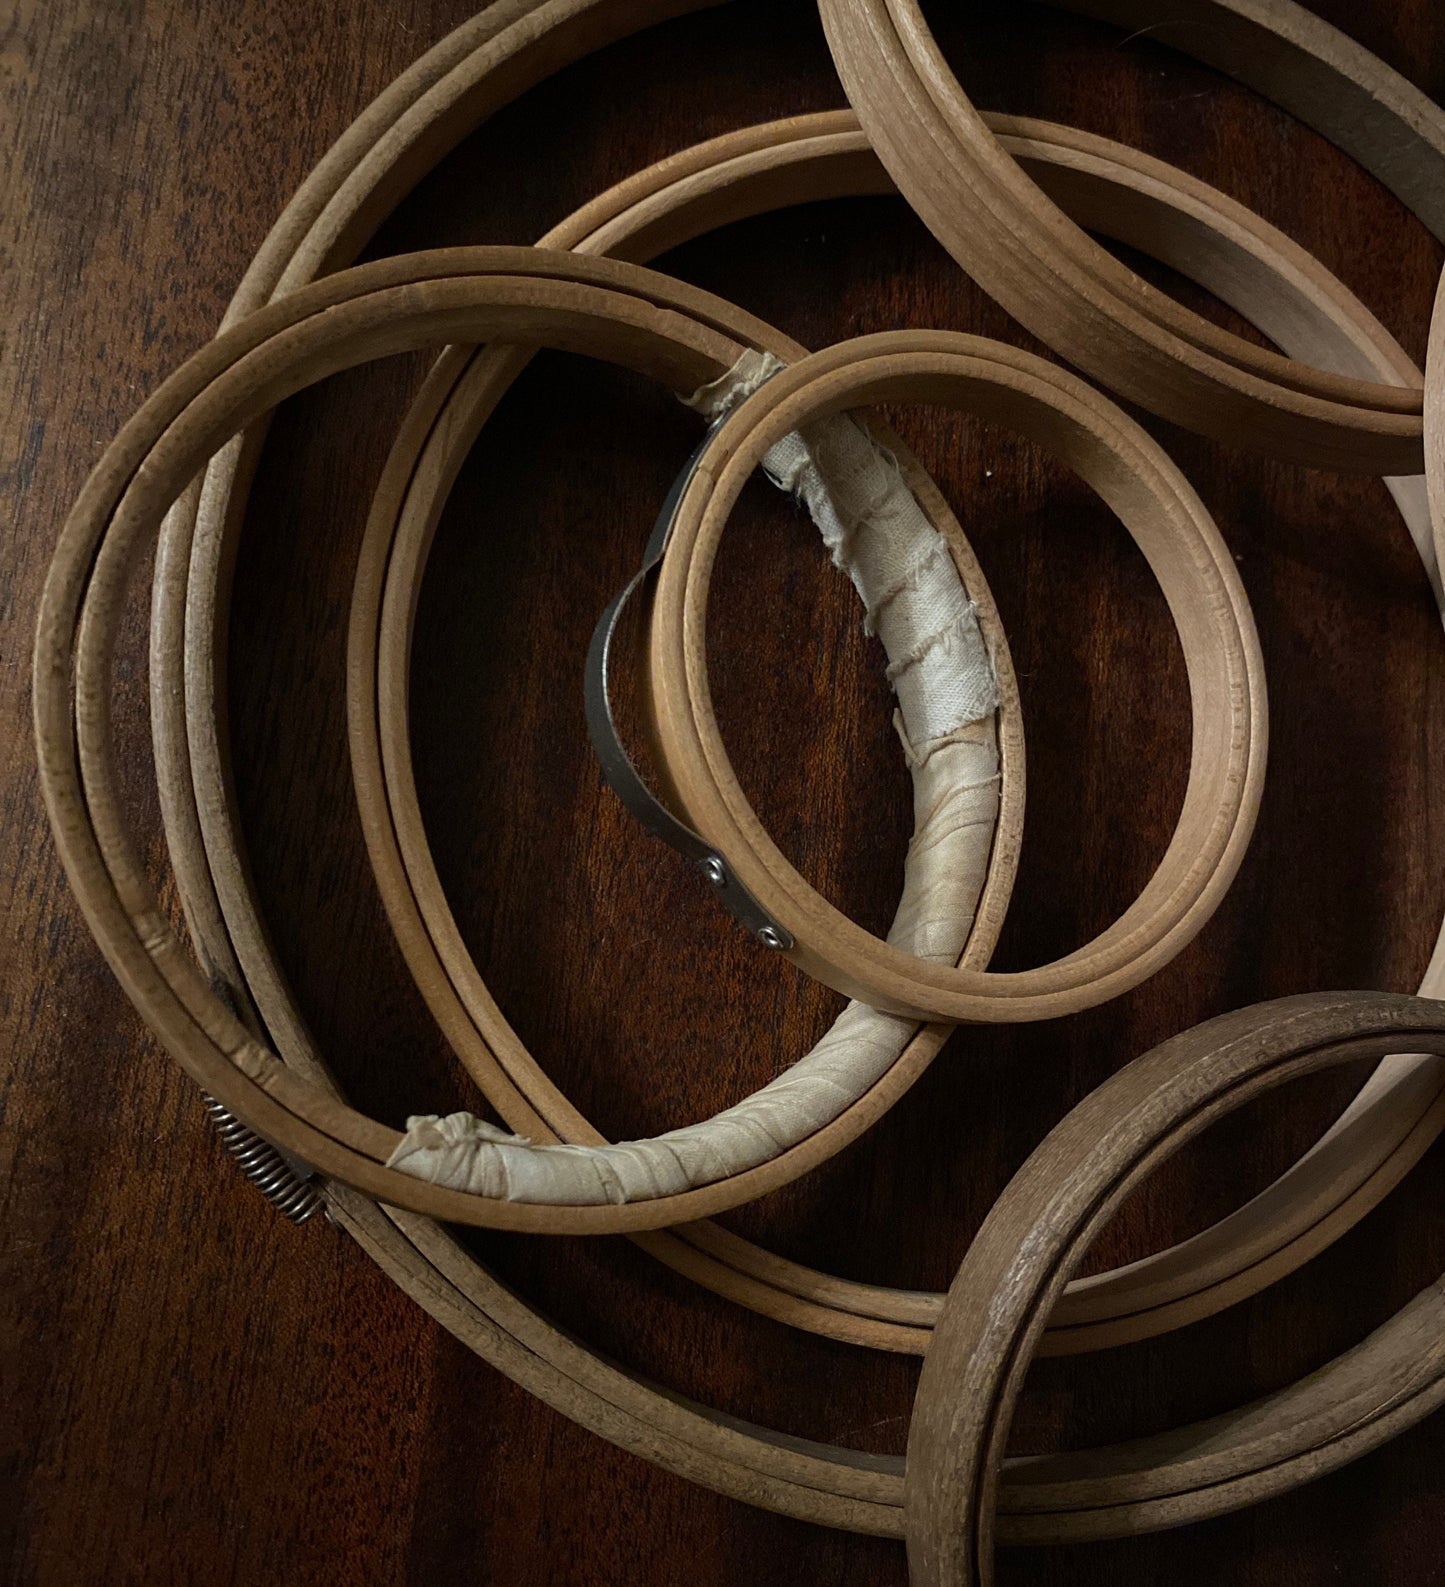 Round Wooden Embroidery Hoop (iron Key), Embroidery Rings, Embroidery Hoop,  Tambour Frame, एम्ब्रायडरी फ्रेम - Craft Store Of India (A Unit Of Tushadi  Enterprises), Bengaluru